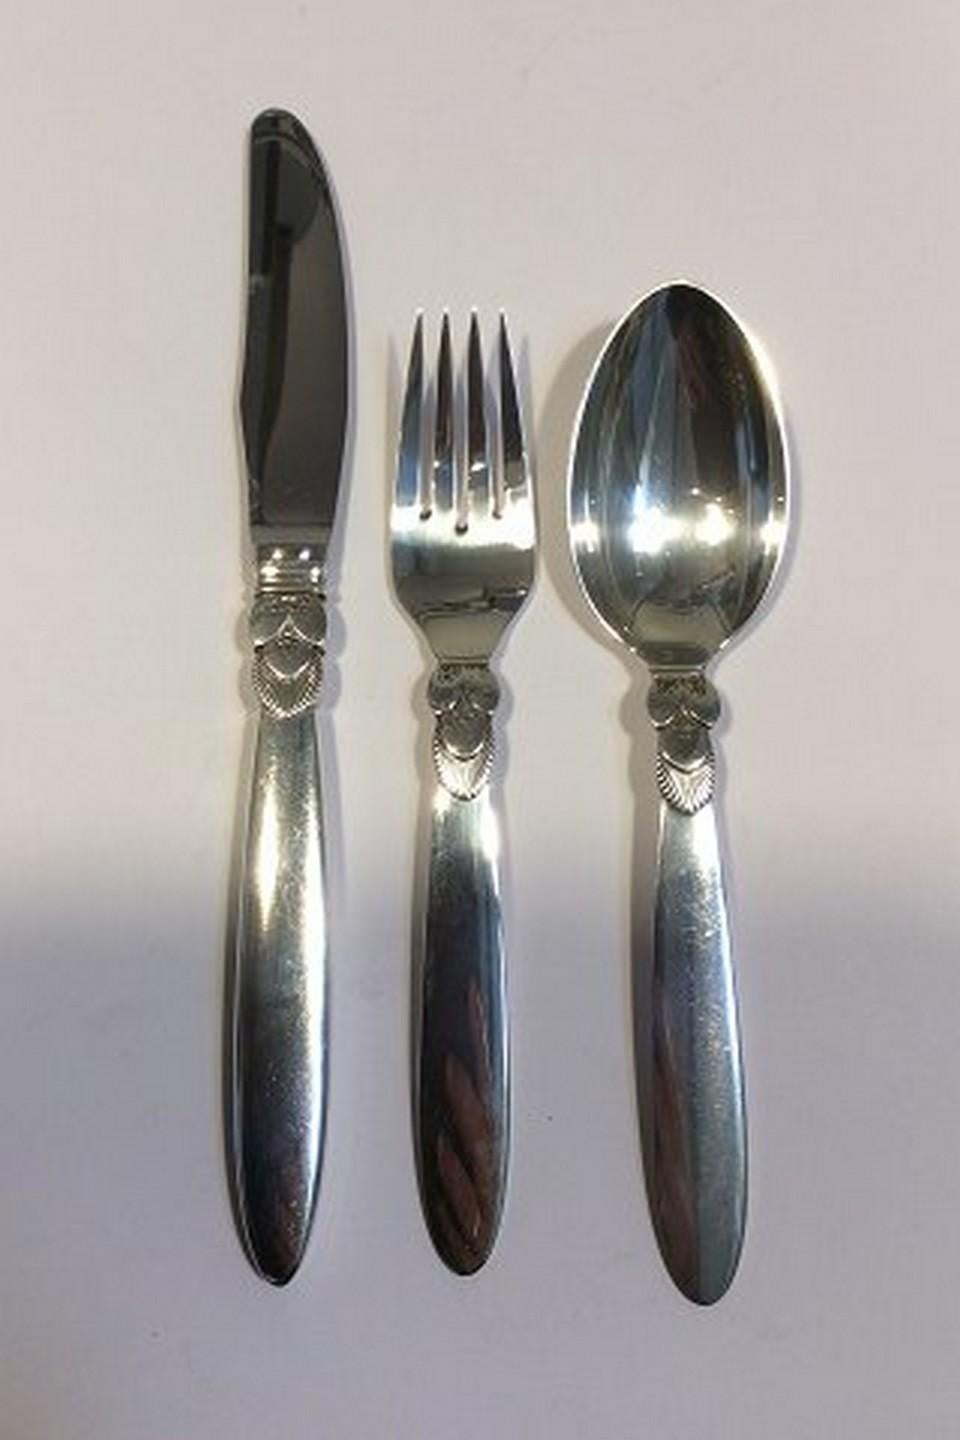 Georg Jensen cactus sterling silver dinner and lunch flatware set, 96 pieces.

The set consist of:

12 x dinner knifes 23 cm / 9 1/16